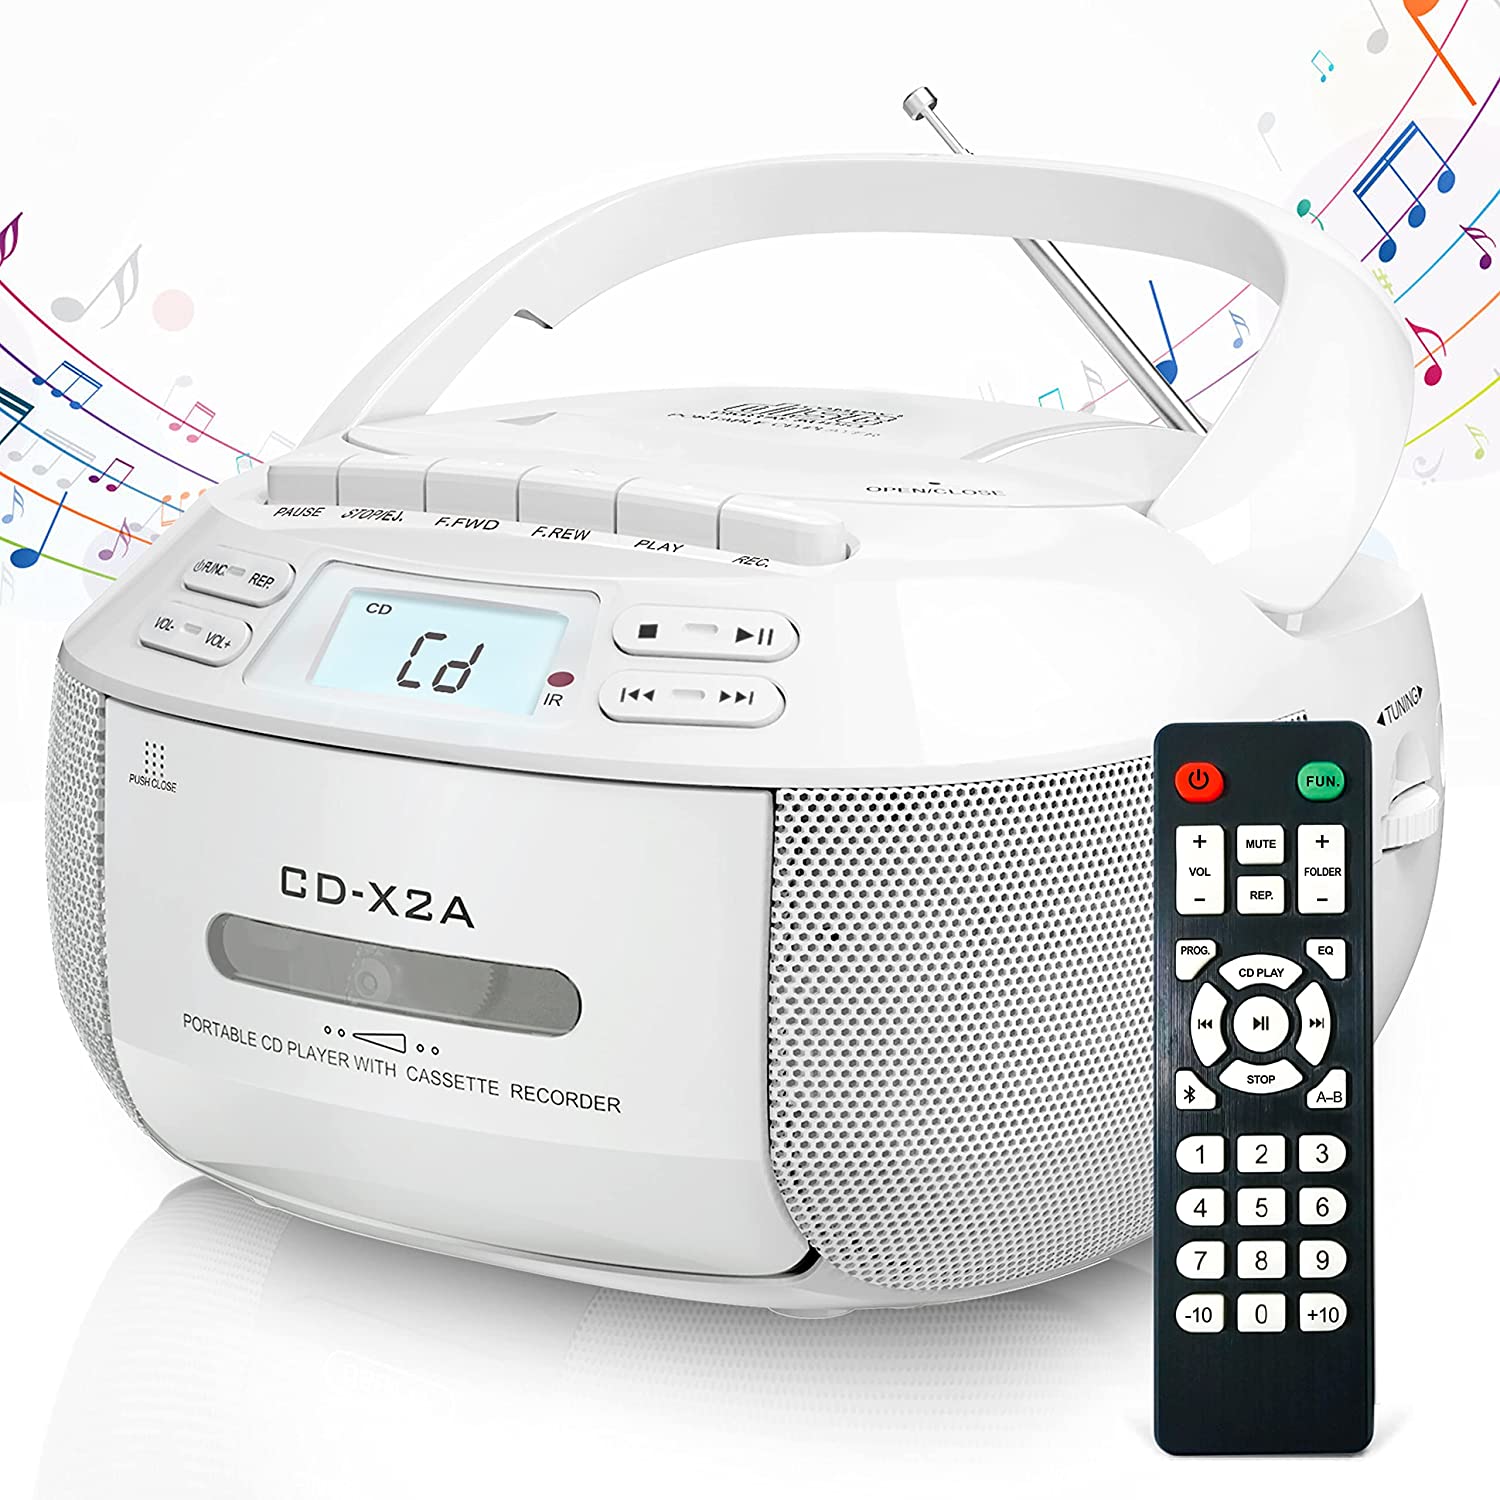 Greadio CD Player Boombox Cassette Player Combo with Bluetooth,AM/FM Radio,Stereo Sound with Remote Control,AUX/USB Drive,Tape Recording,AC/DC Powered,Headphone Jack,LCD Display for Home,Kids,Gift